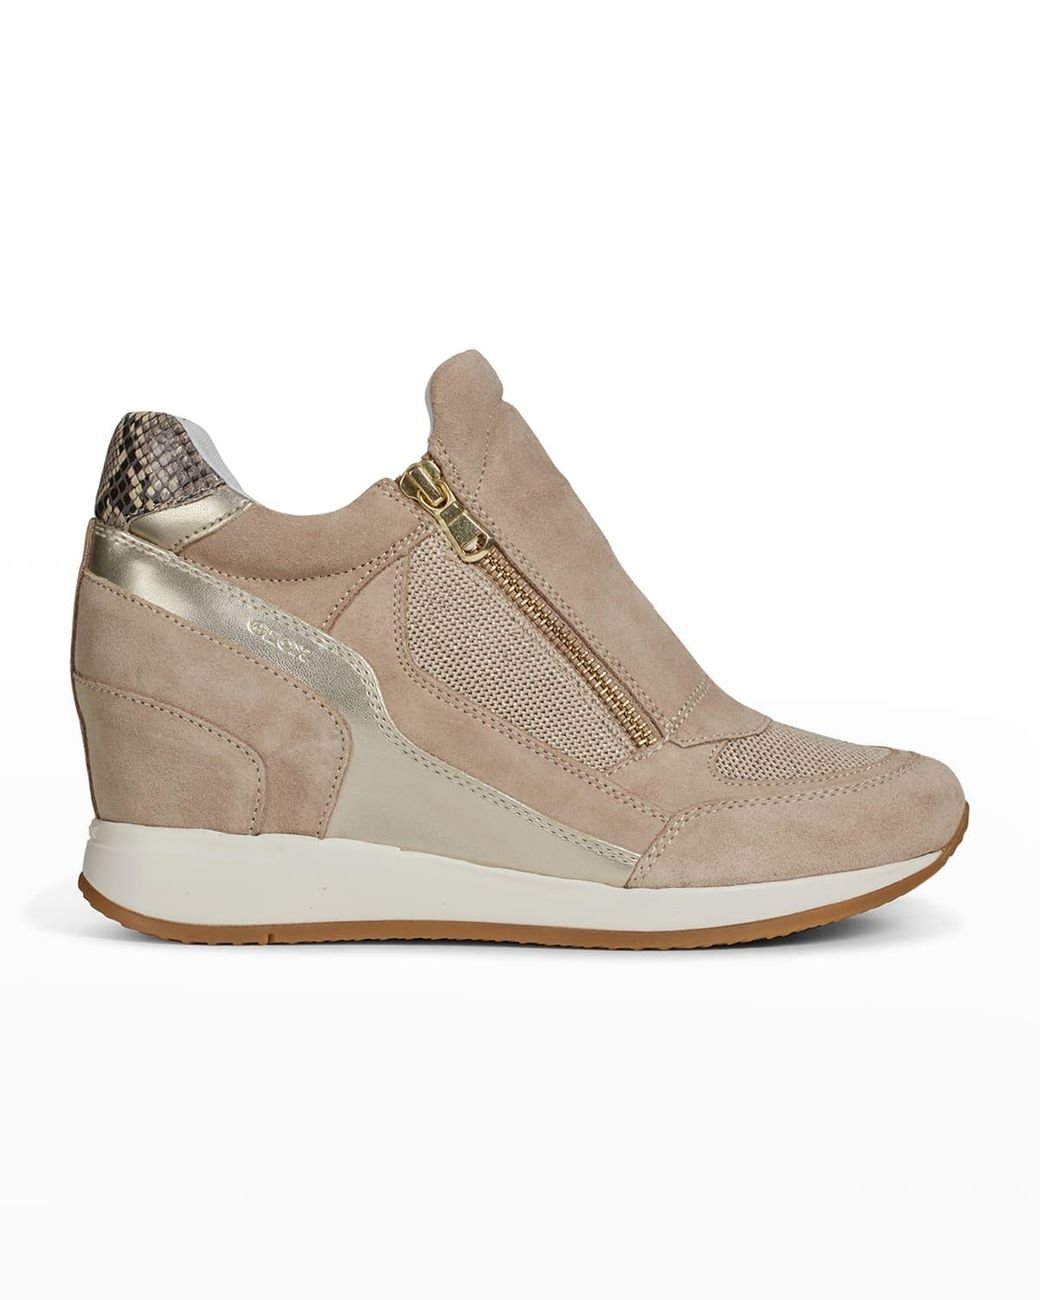 Geox Nydame Mix-media Wedge Sneakers in Natural | Lyst